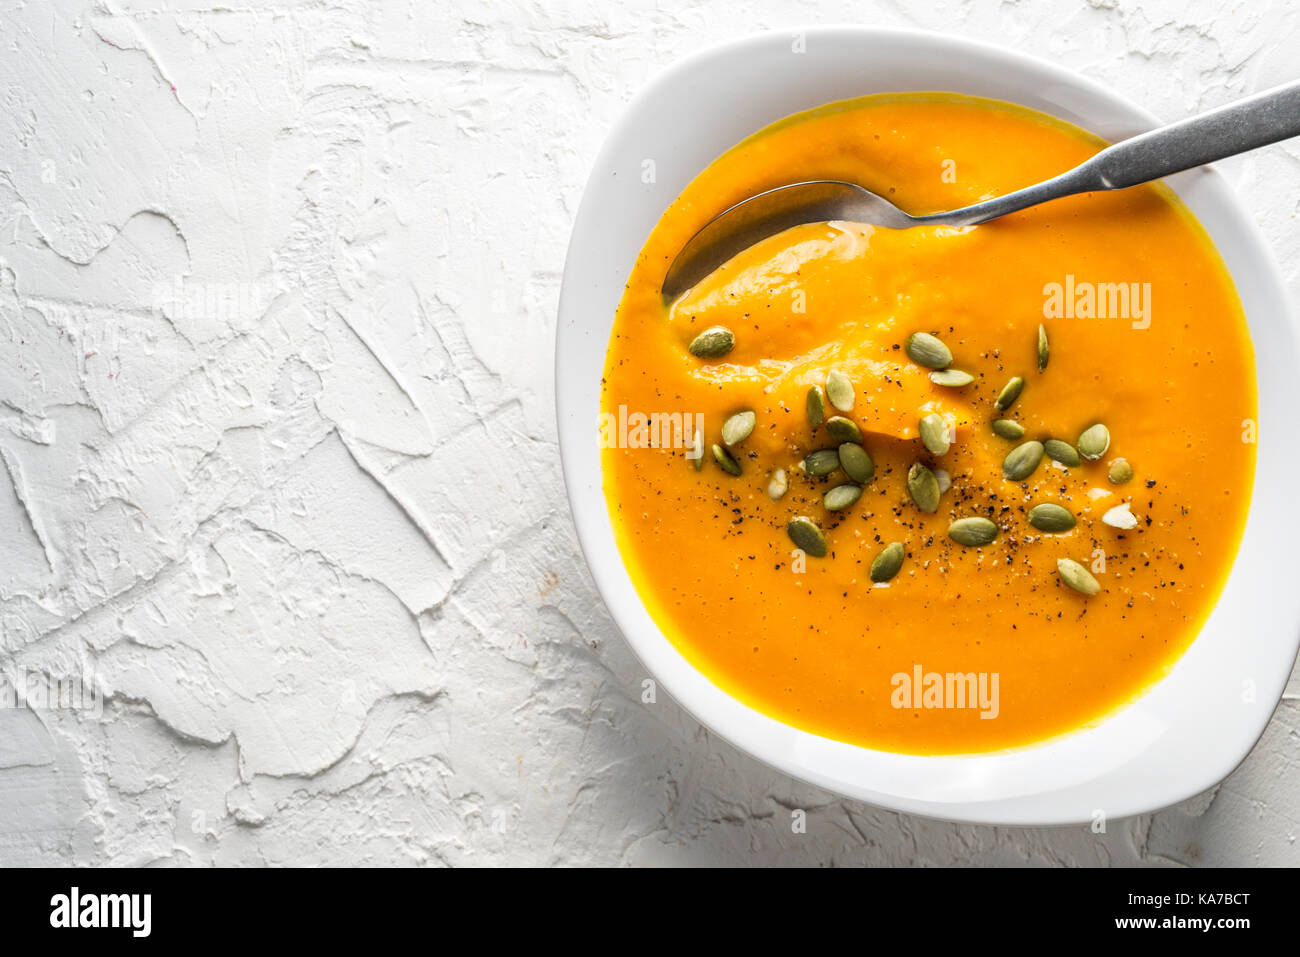 Pumpkin soup with seeds and a spoon in a plate horizontal Stock Photo